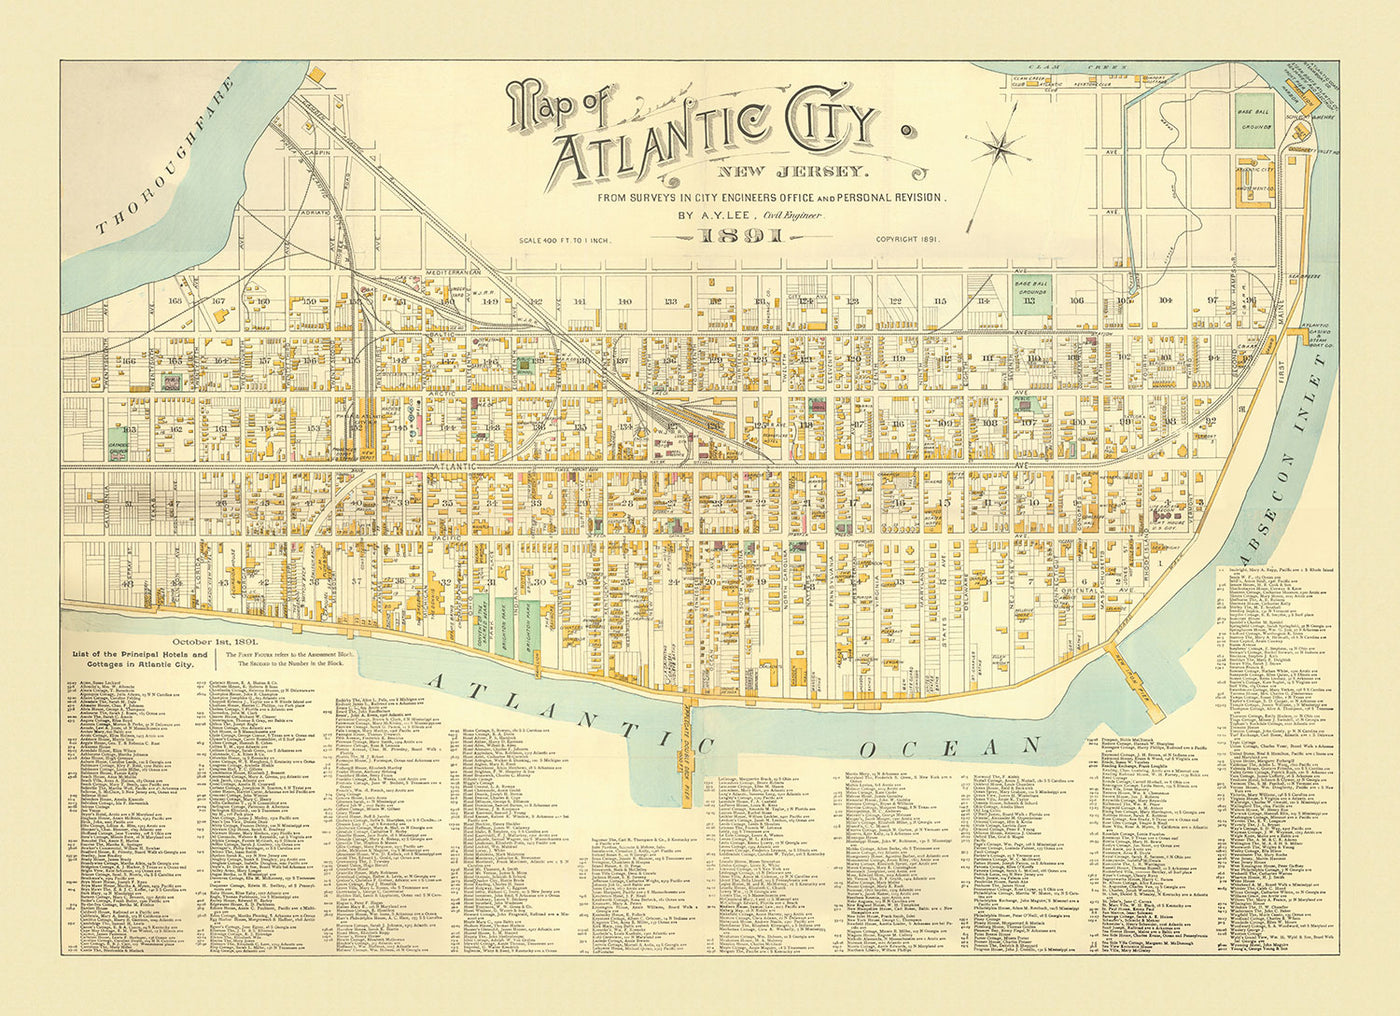 Old Map of Atlantic City, New Jersey, in 1891 by AY Lee - Boardwalk, Pacific, Baltic, Atlantic, Delaware Avenue